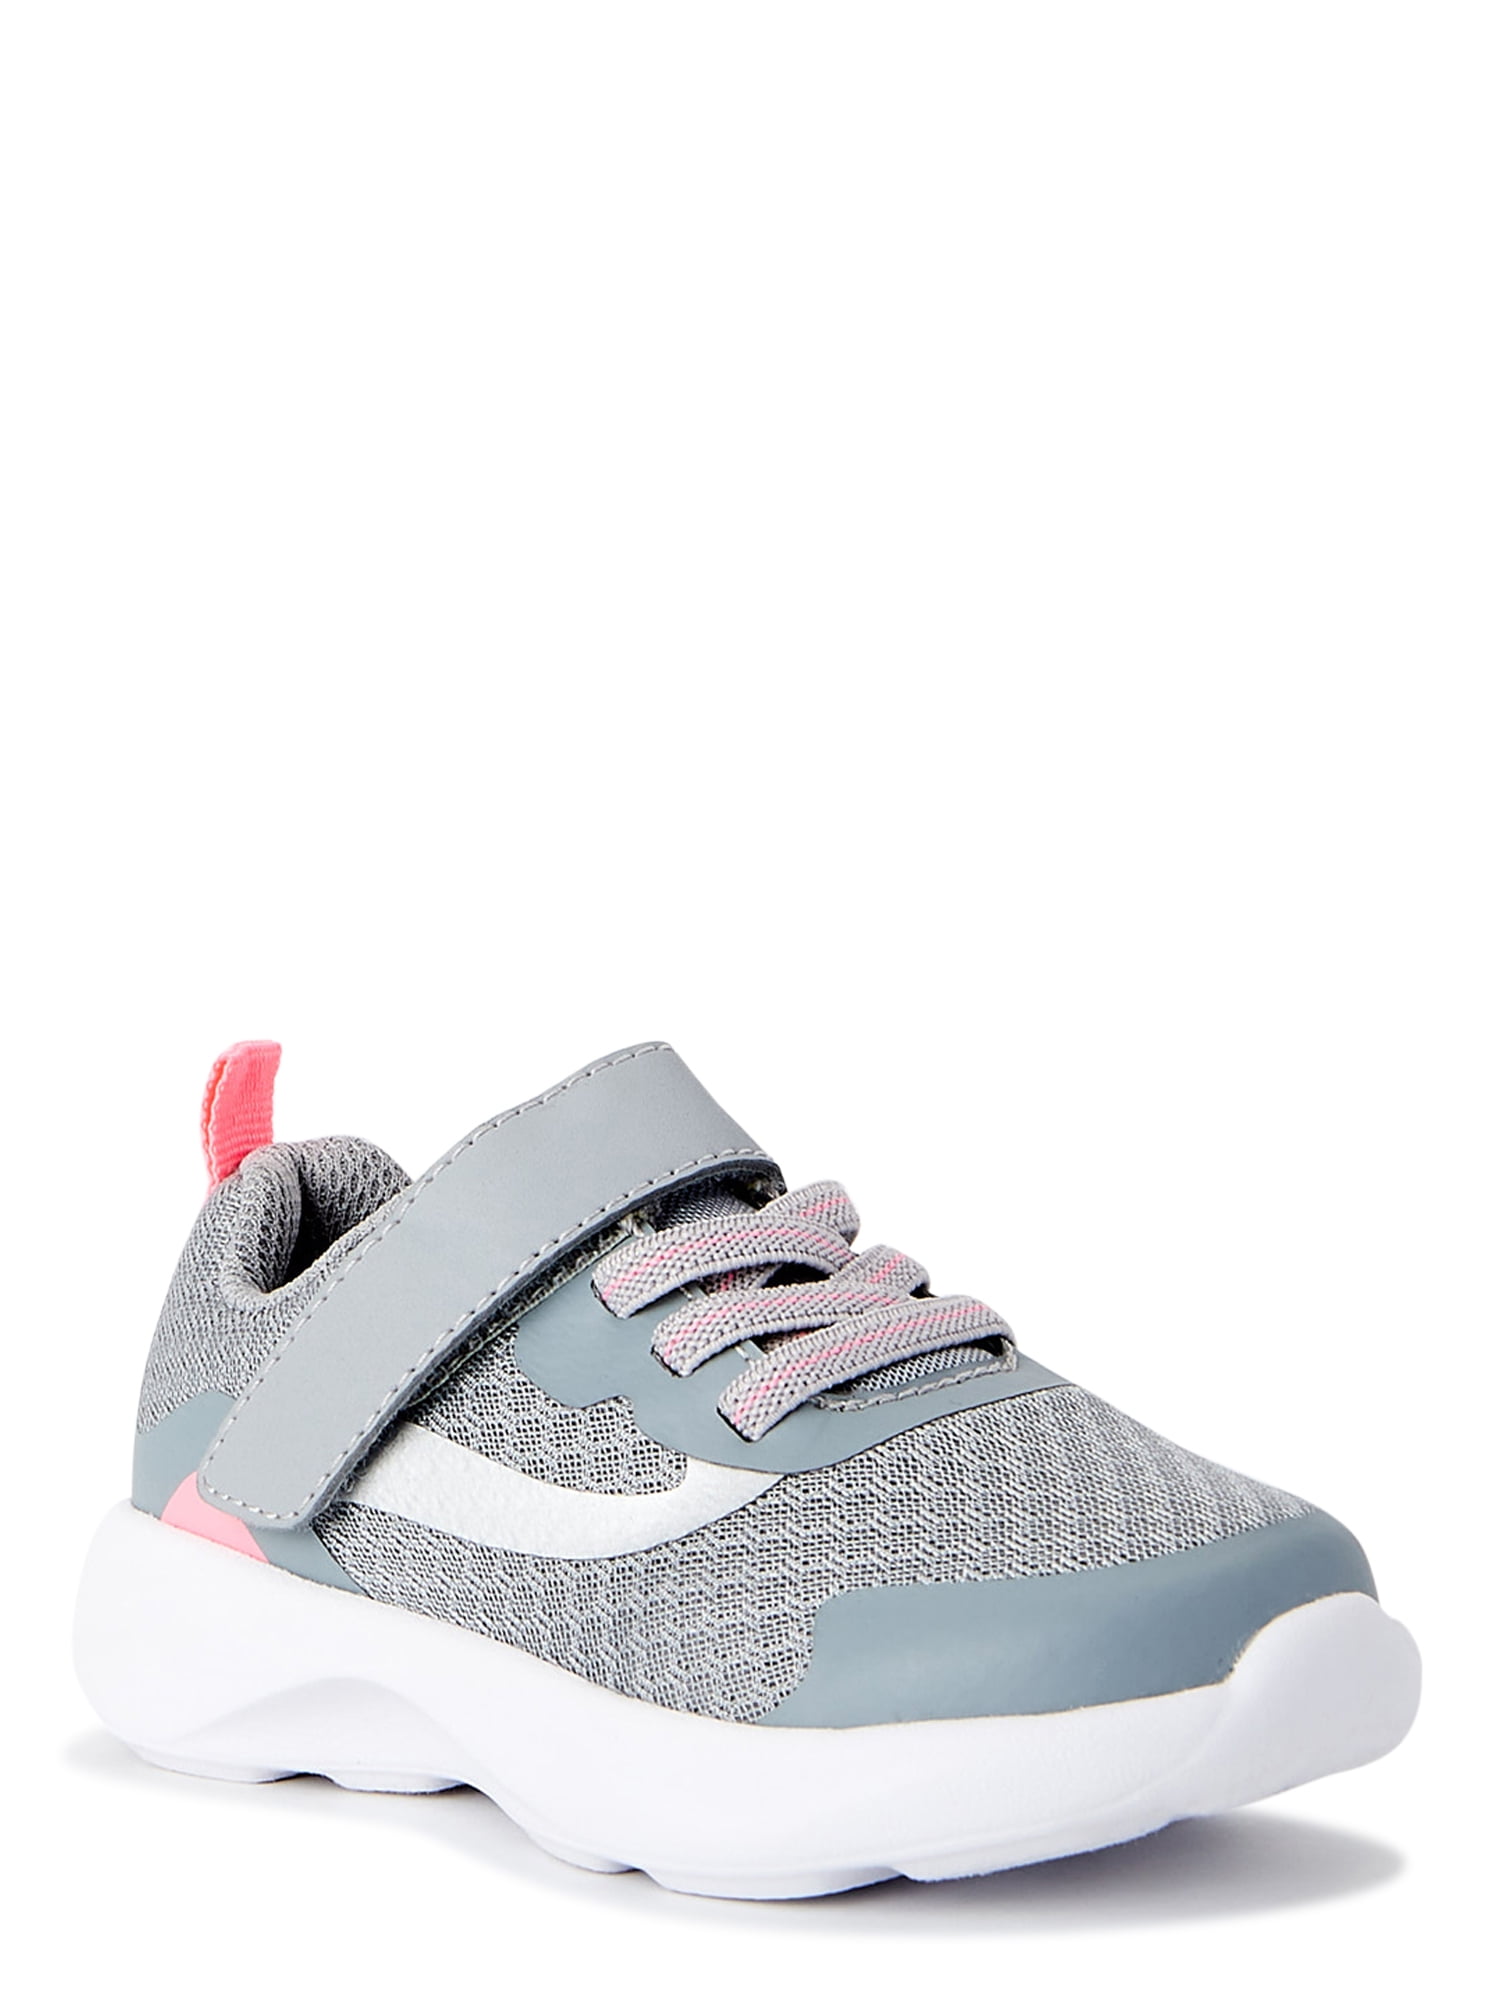 Athletic Works Baby Girls Mesh Jogger Sneakers, Sizes 2-6